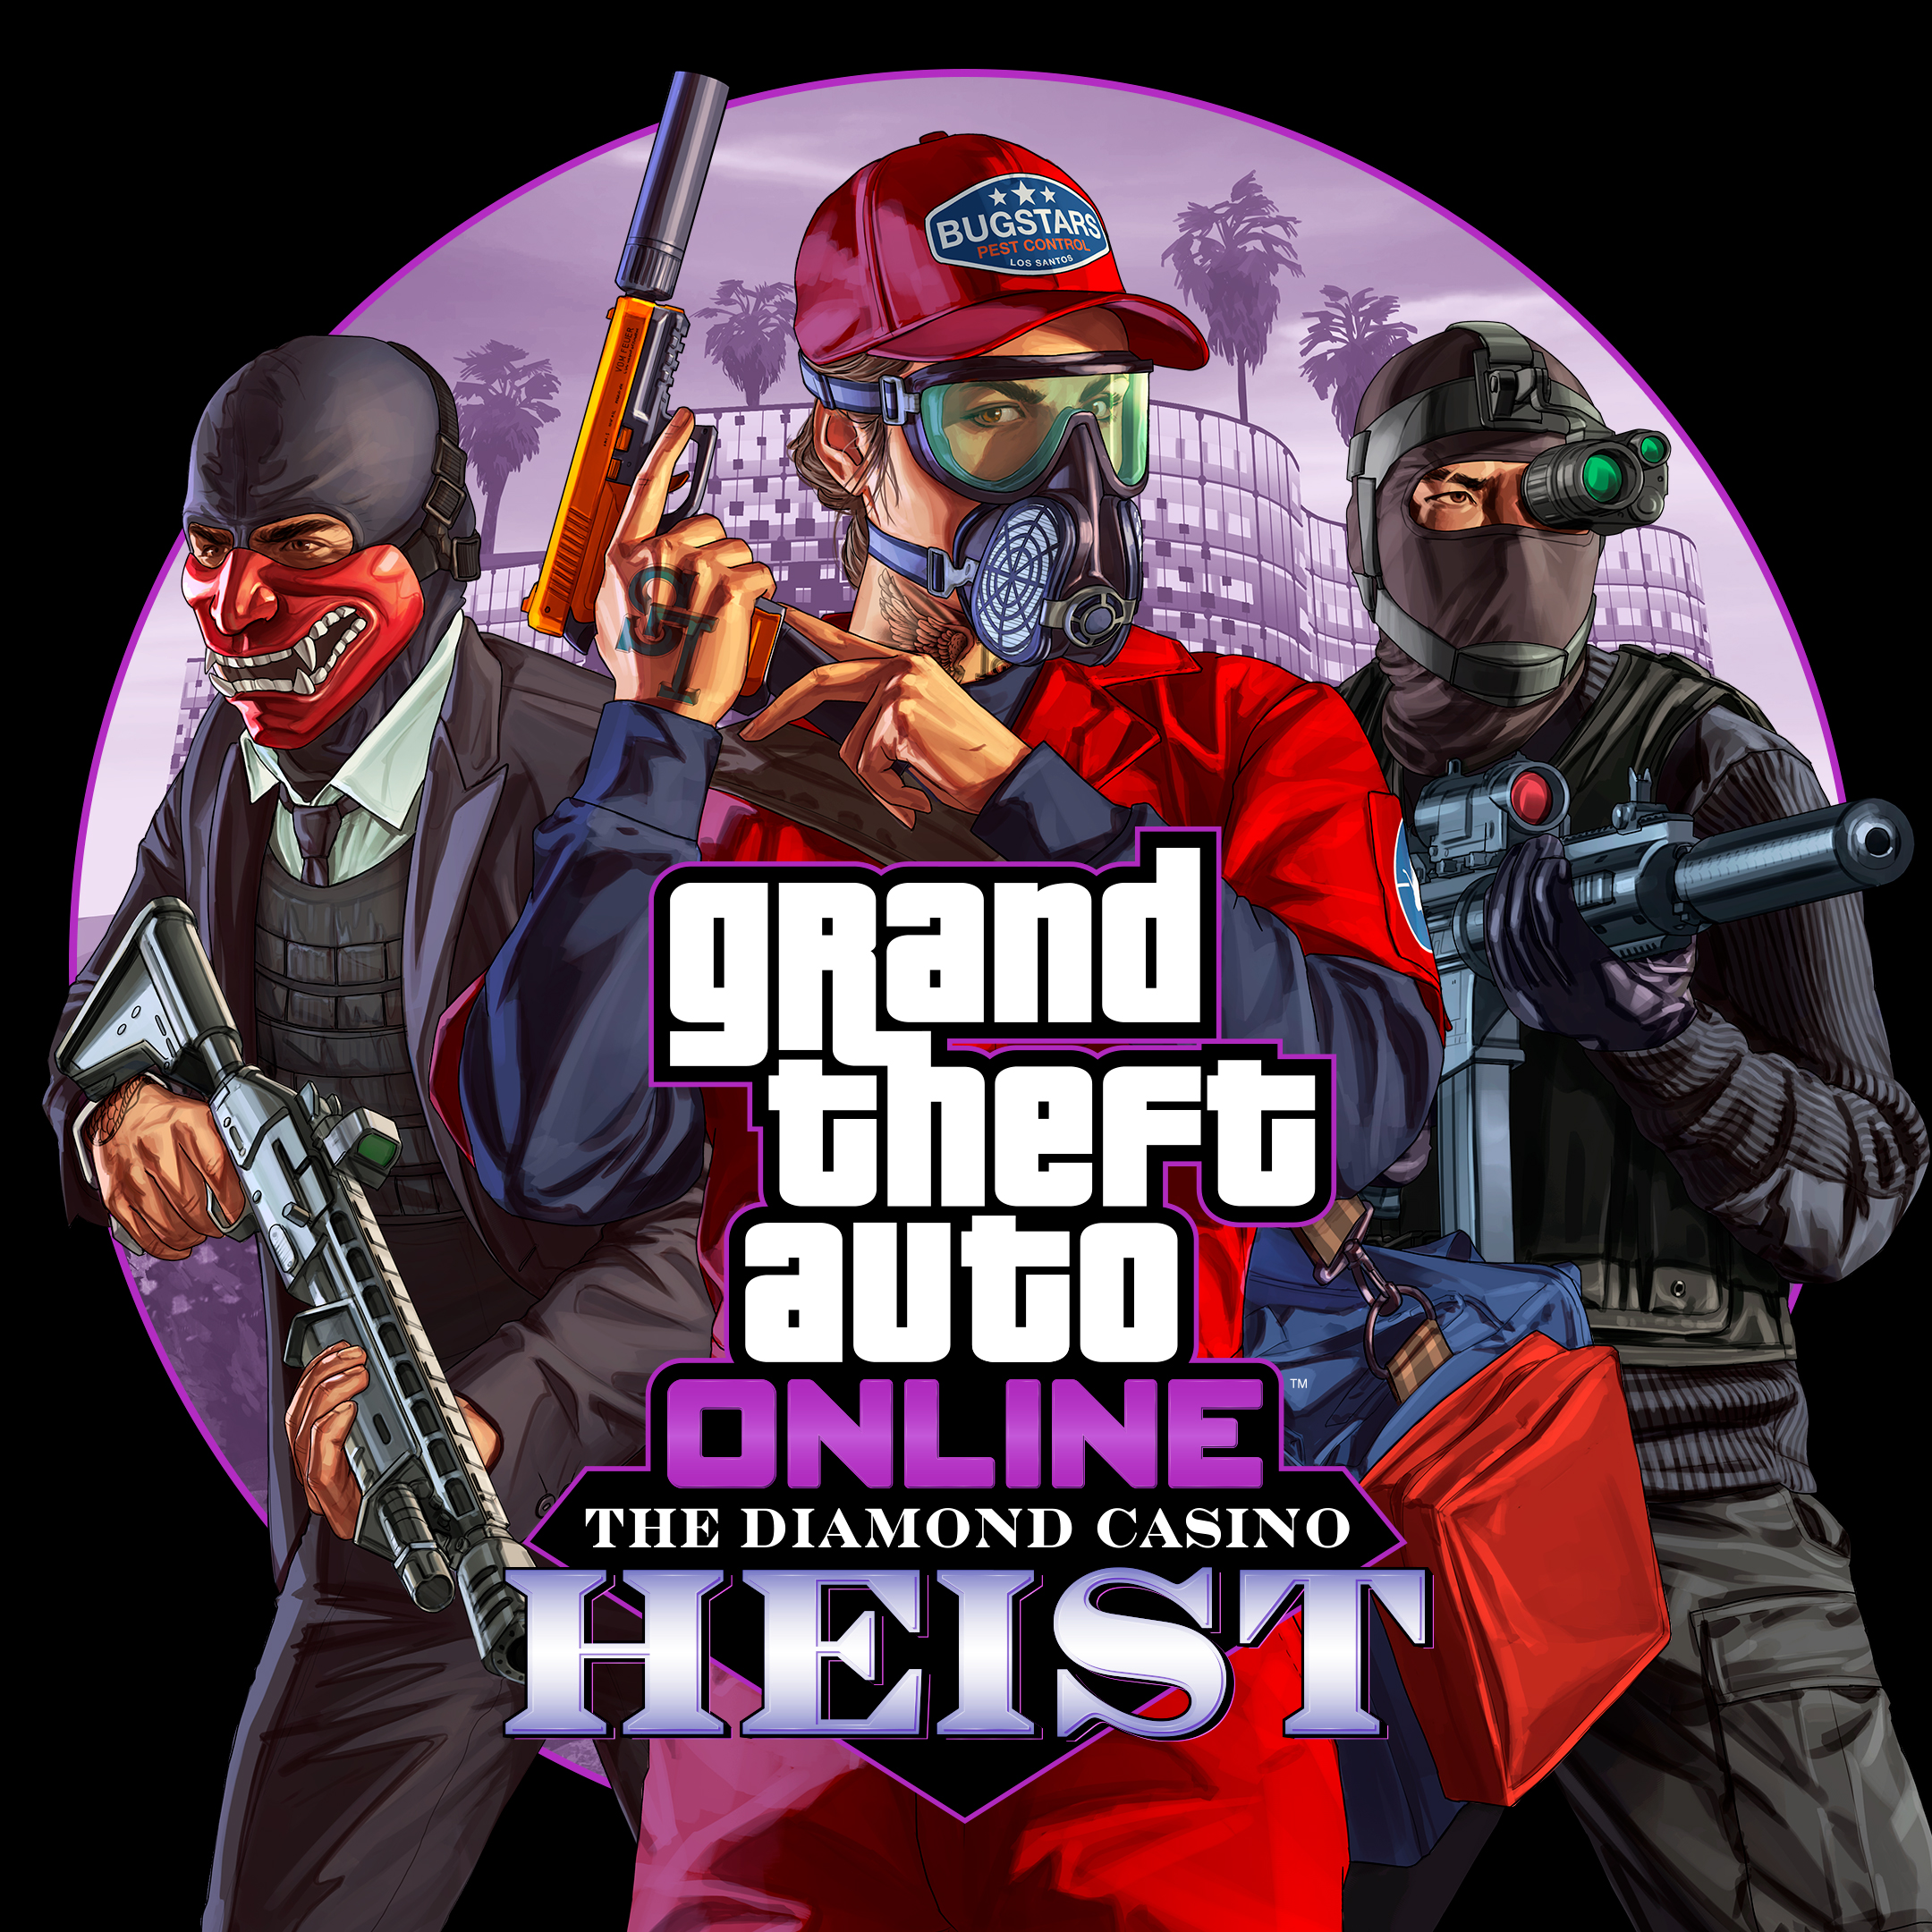 GTA Online Heists Now Available - Rockstar Games